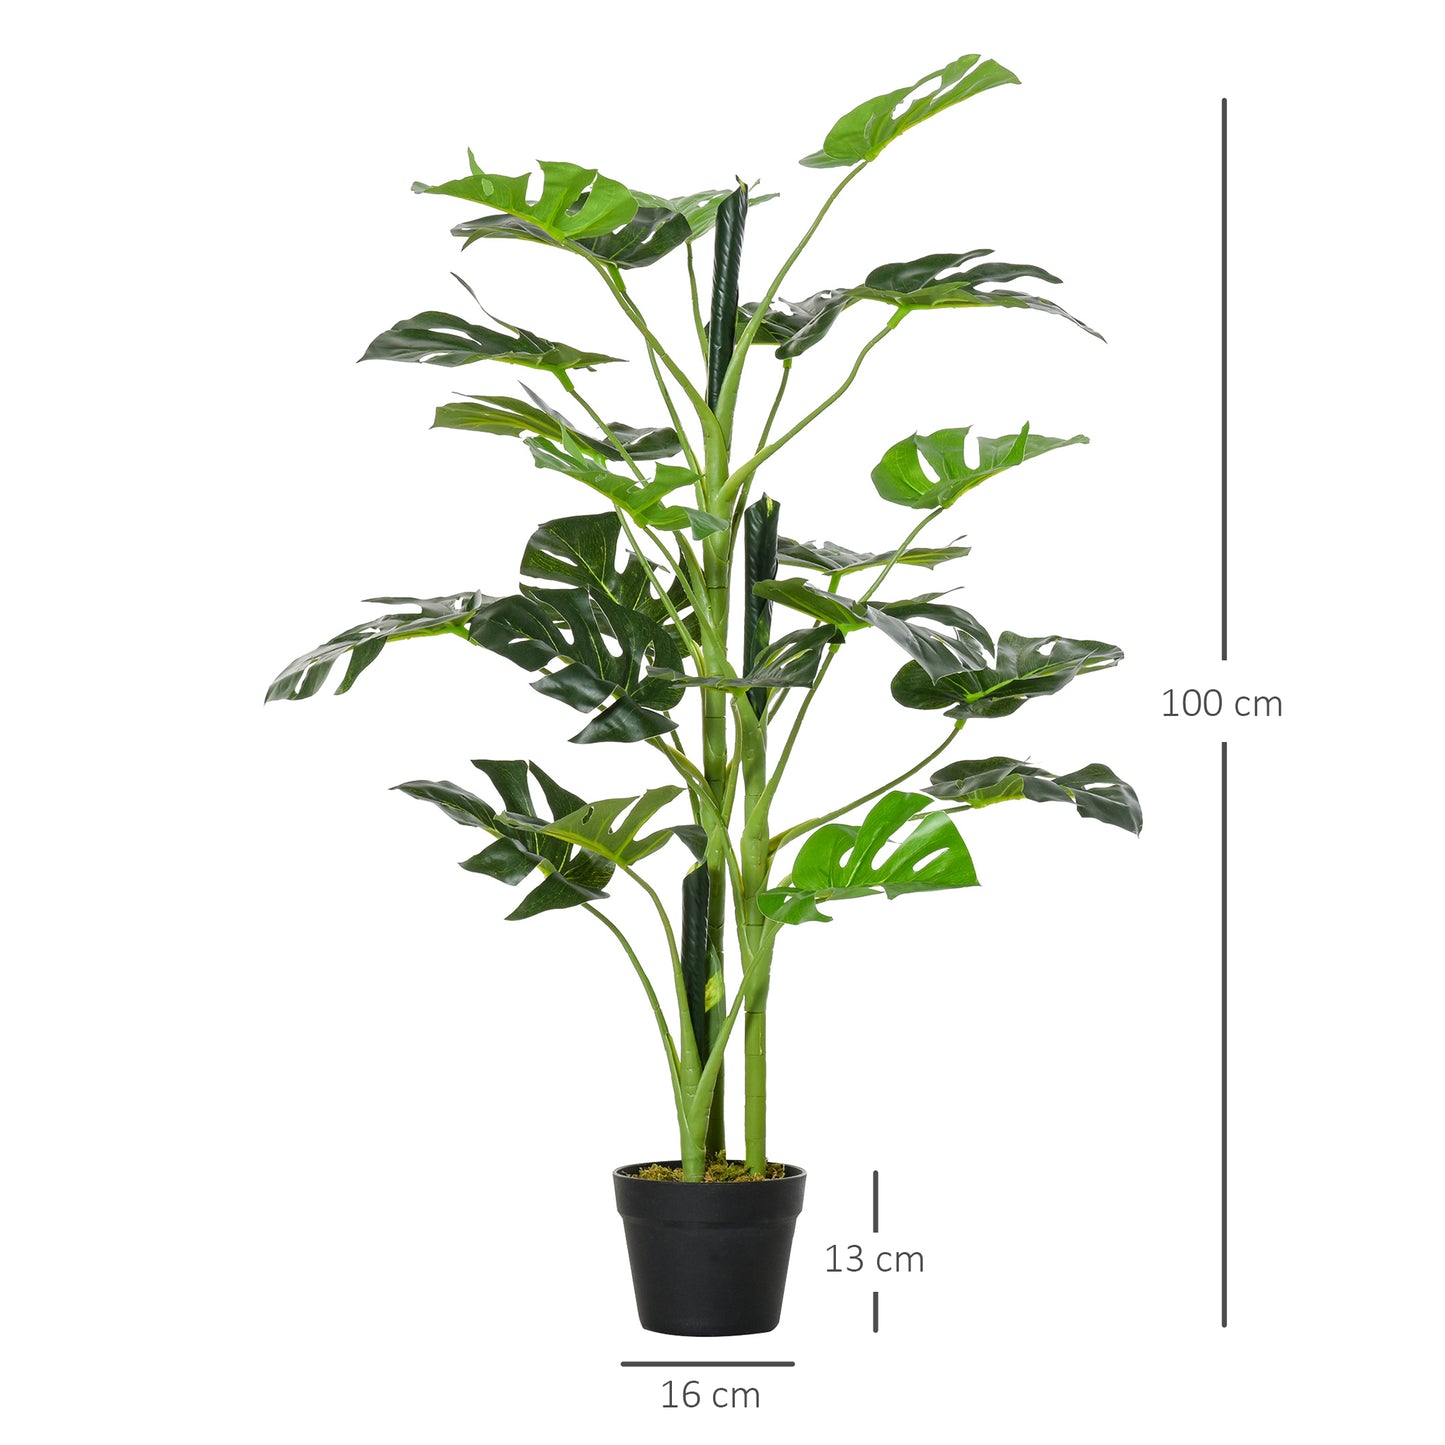 Outsunny 100cm/3.3FT Artificial Monstera Tree Decorative Cheese Plant 21 Leaves with Nursery Pot, Fake Tropical Palm Tree for Indoor Outdoor Décor